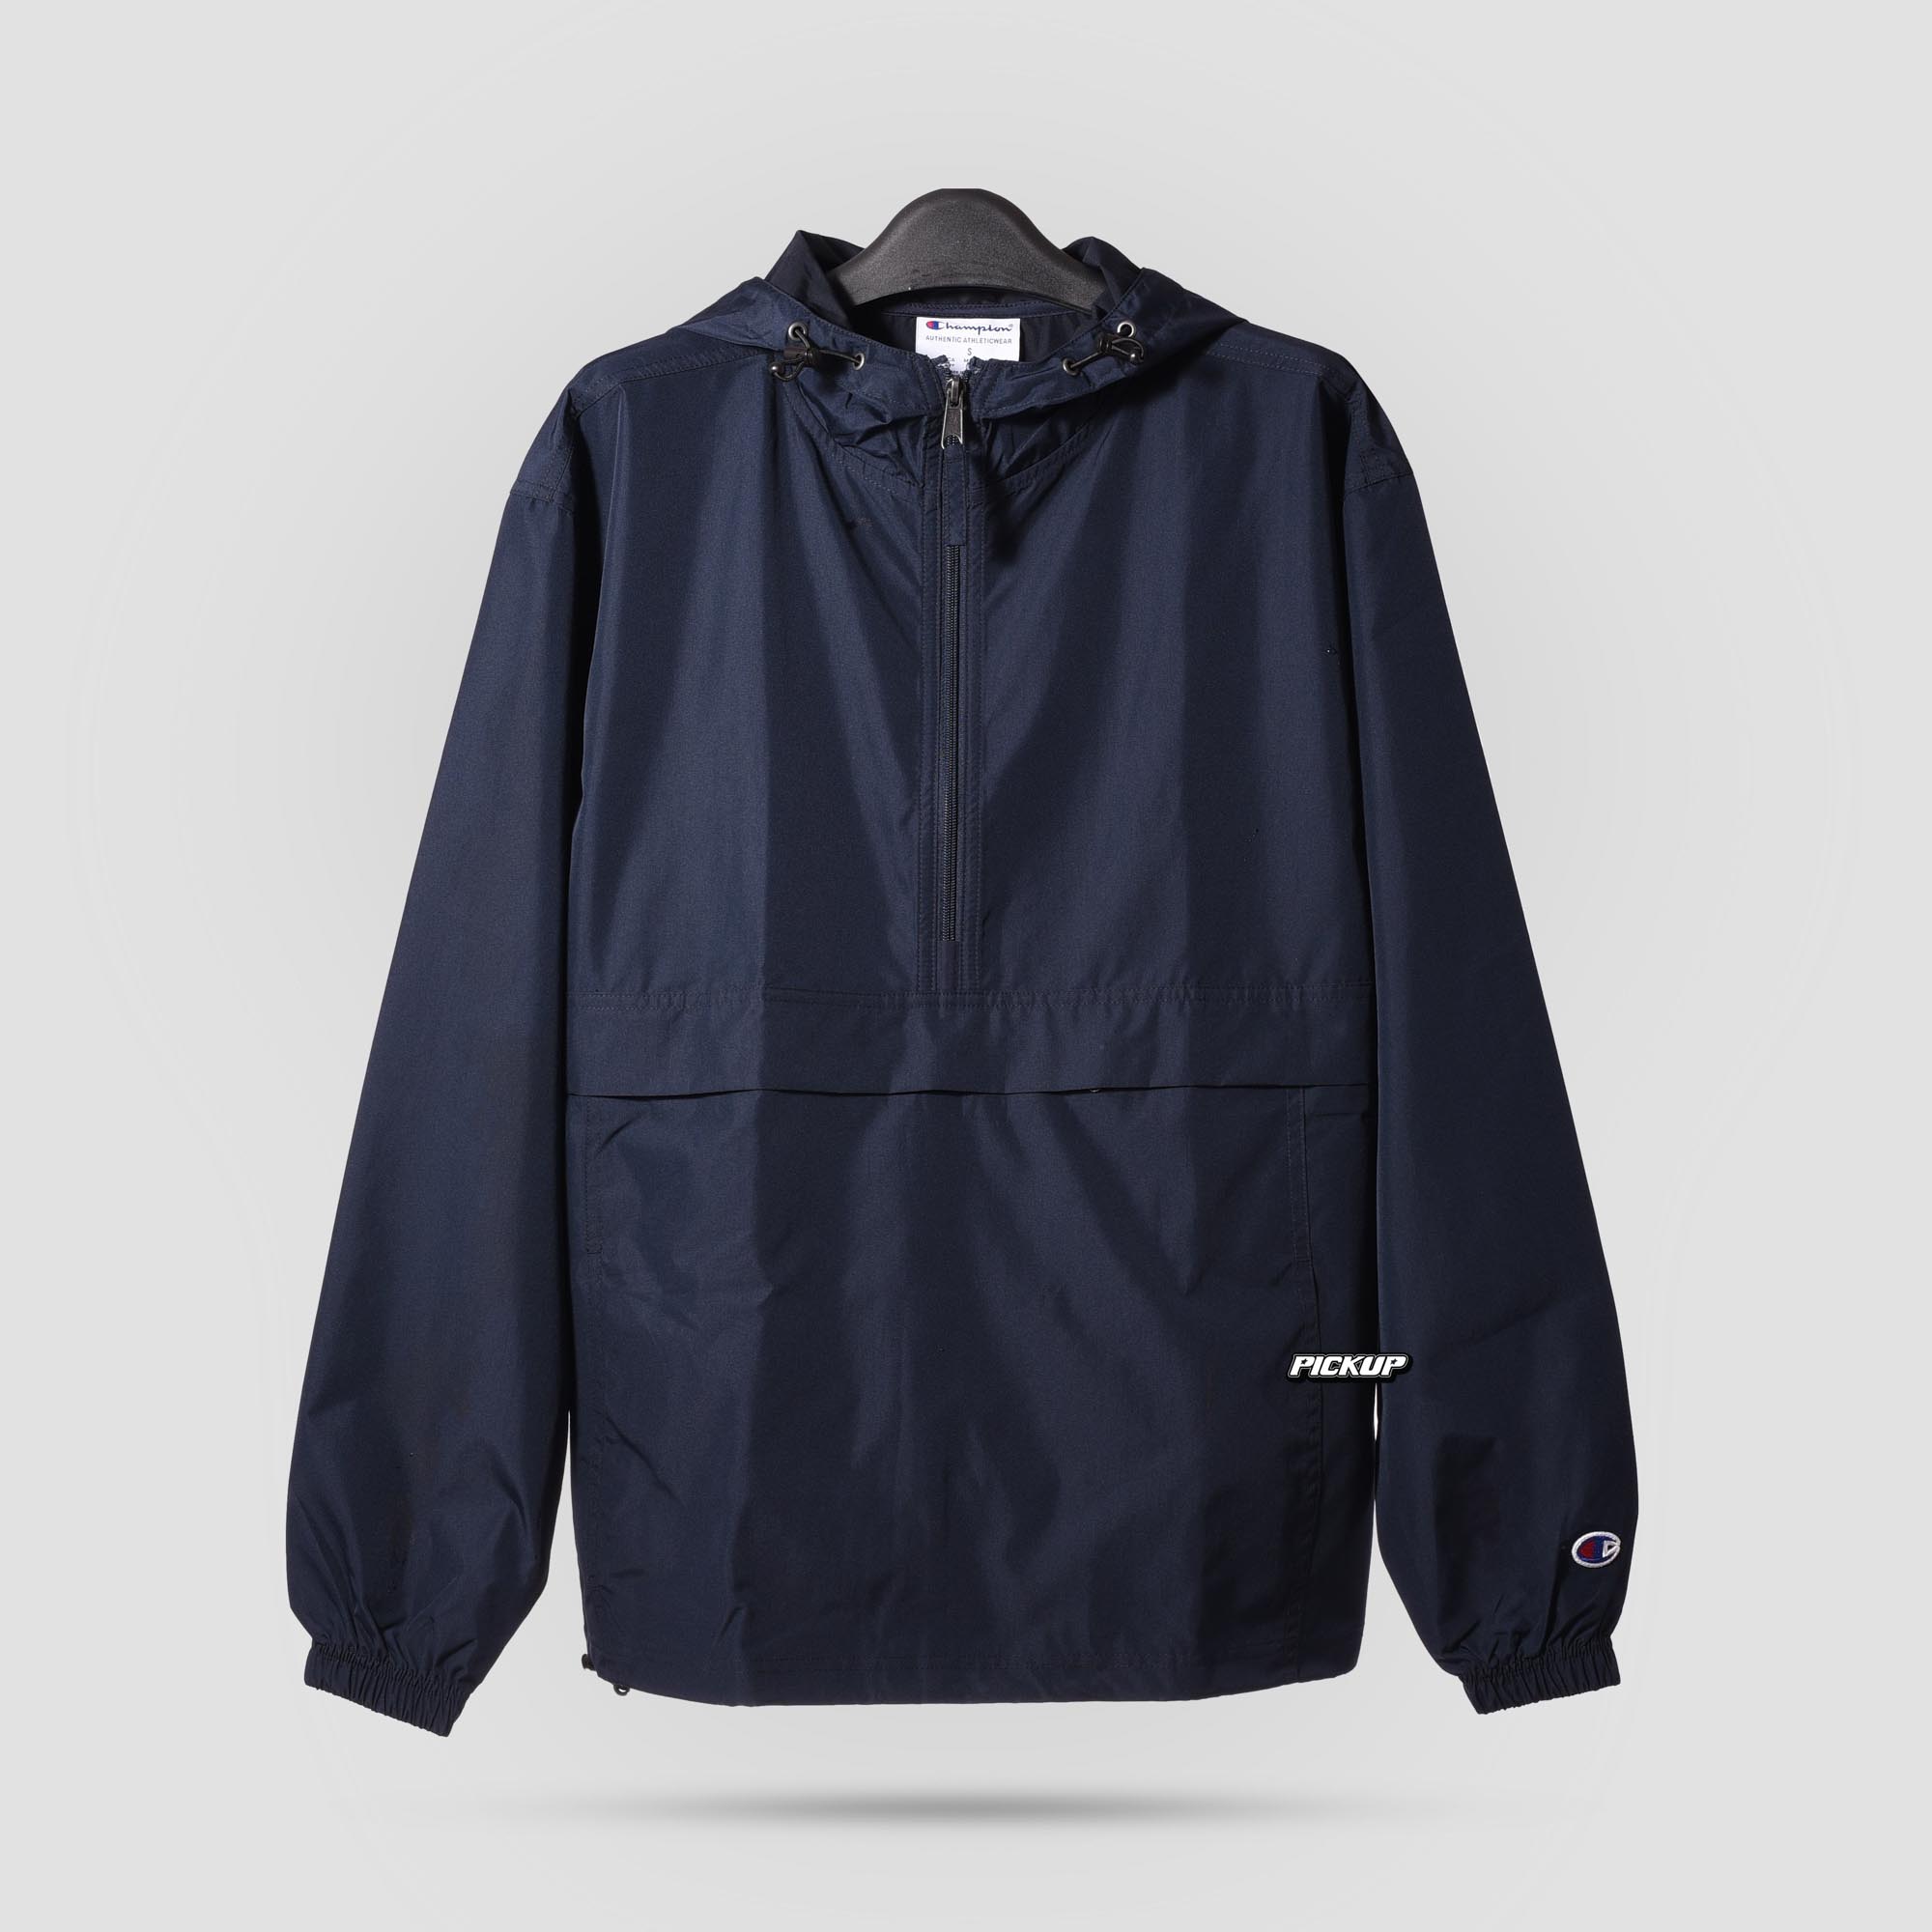 CHAMPION PACKABLE JACKET BASIC - NAVY